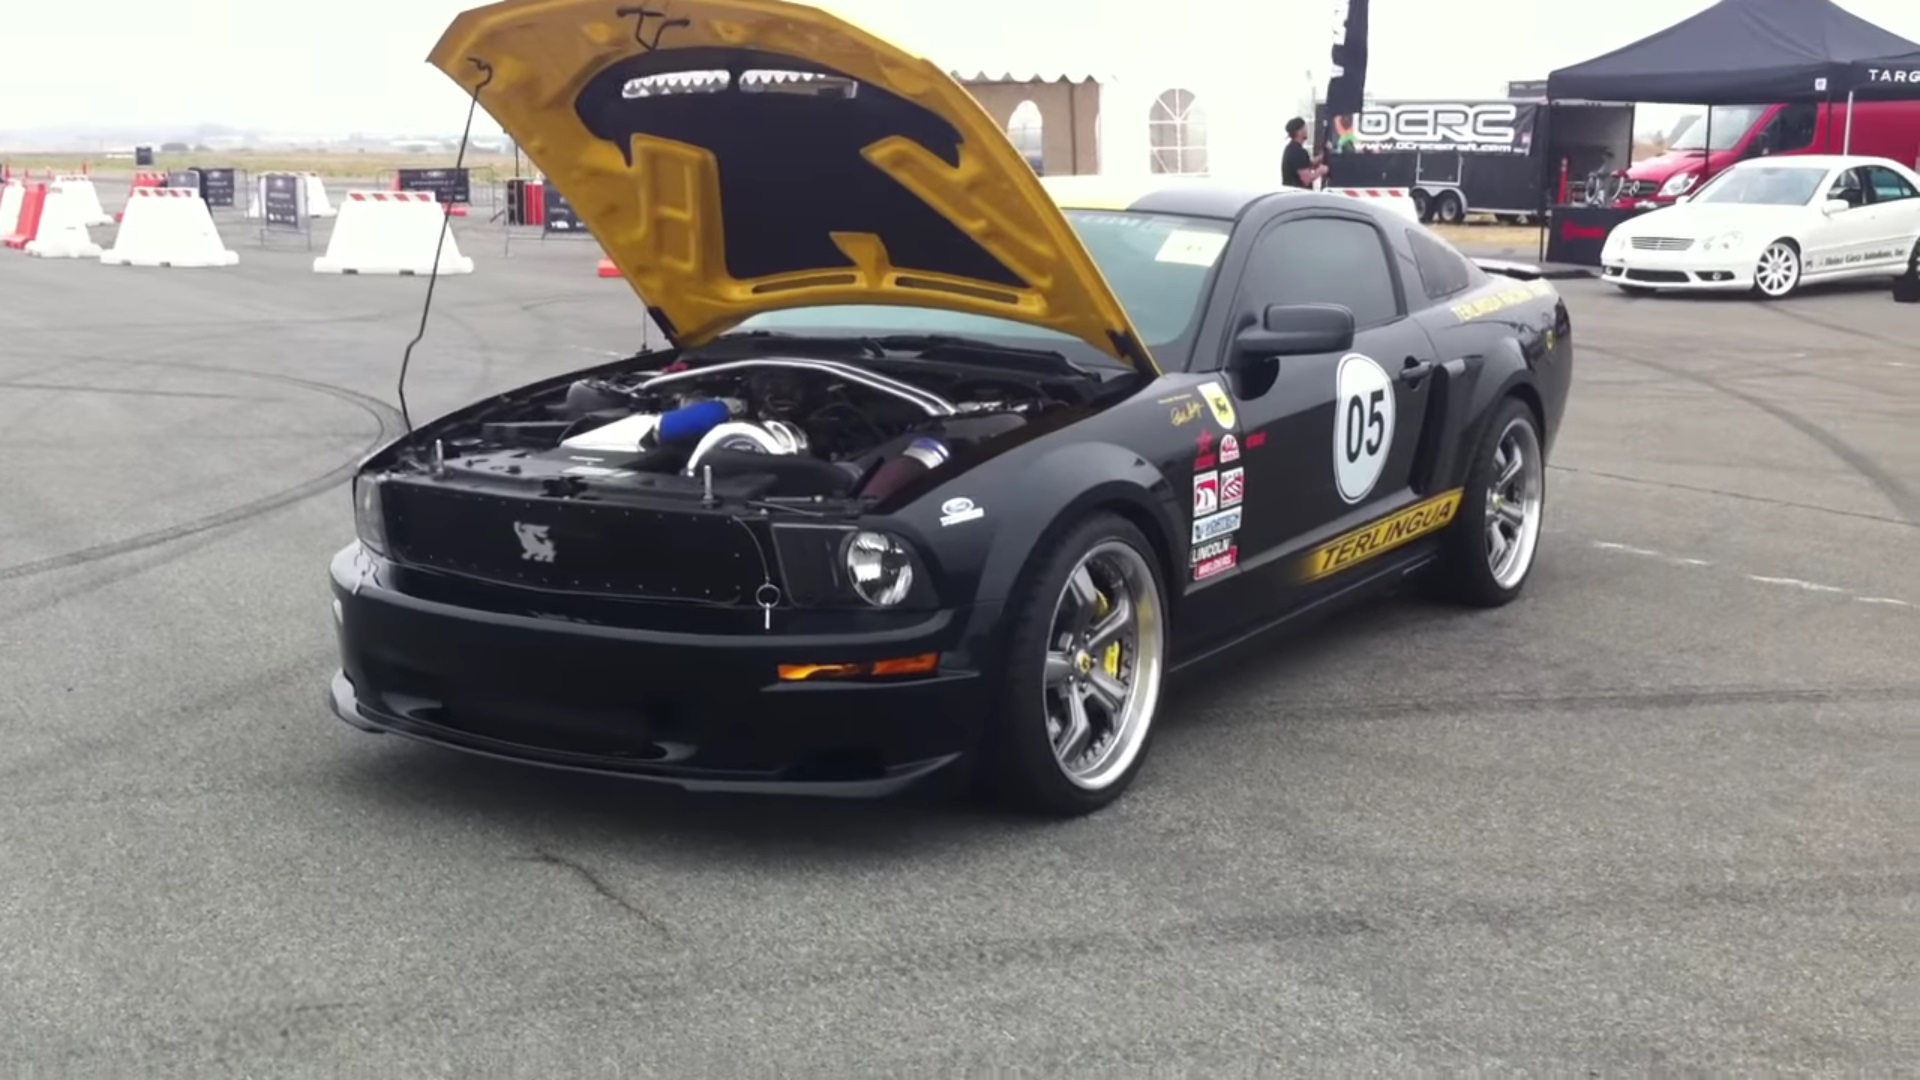 Video: 2008 Ford Mustang Shelby Terlingua Walkaround